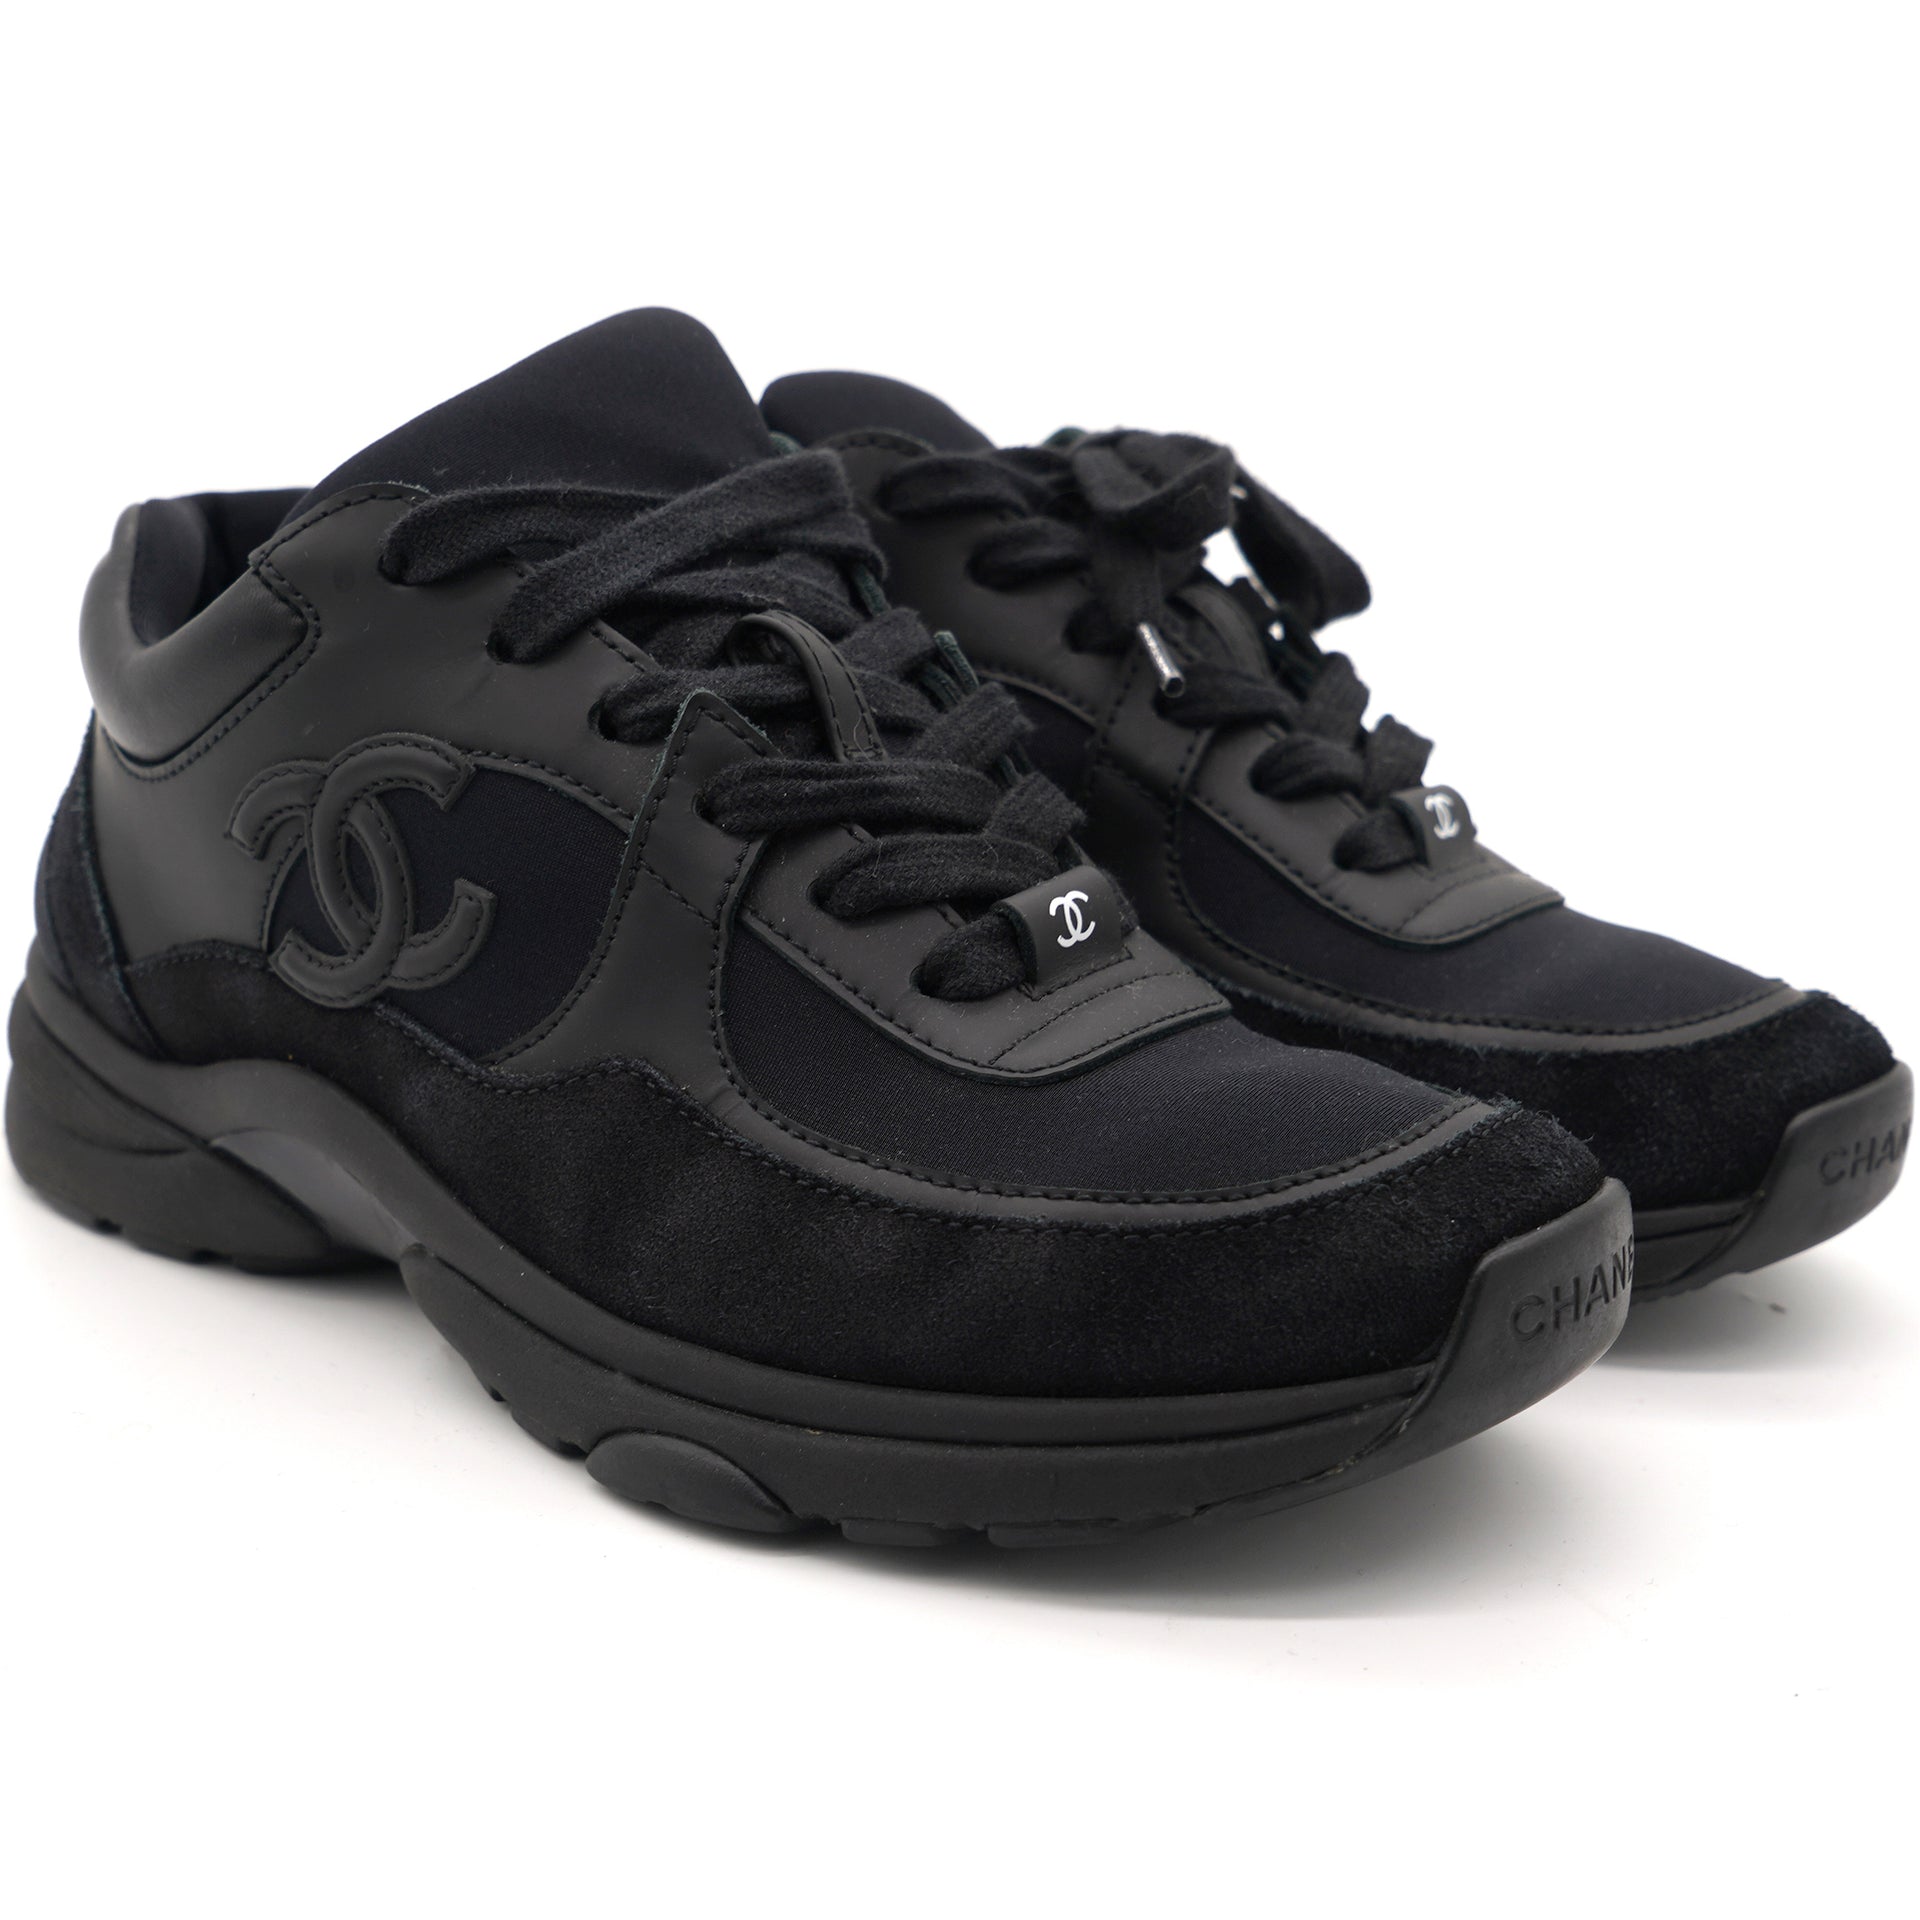 Chanel Black Leather, Fabric and Suede CC Lace Up Sneakers Size